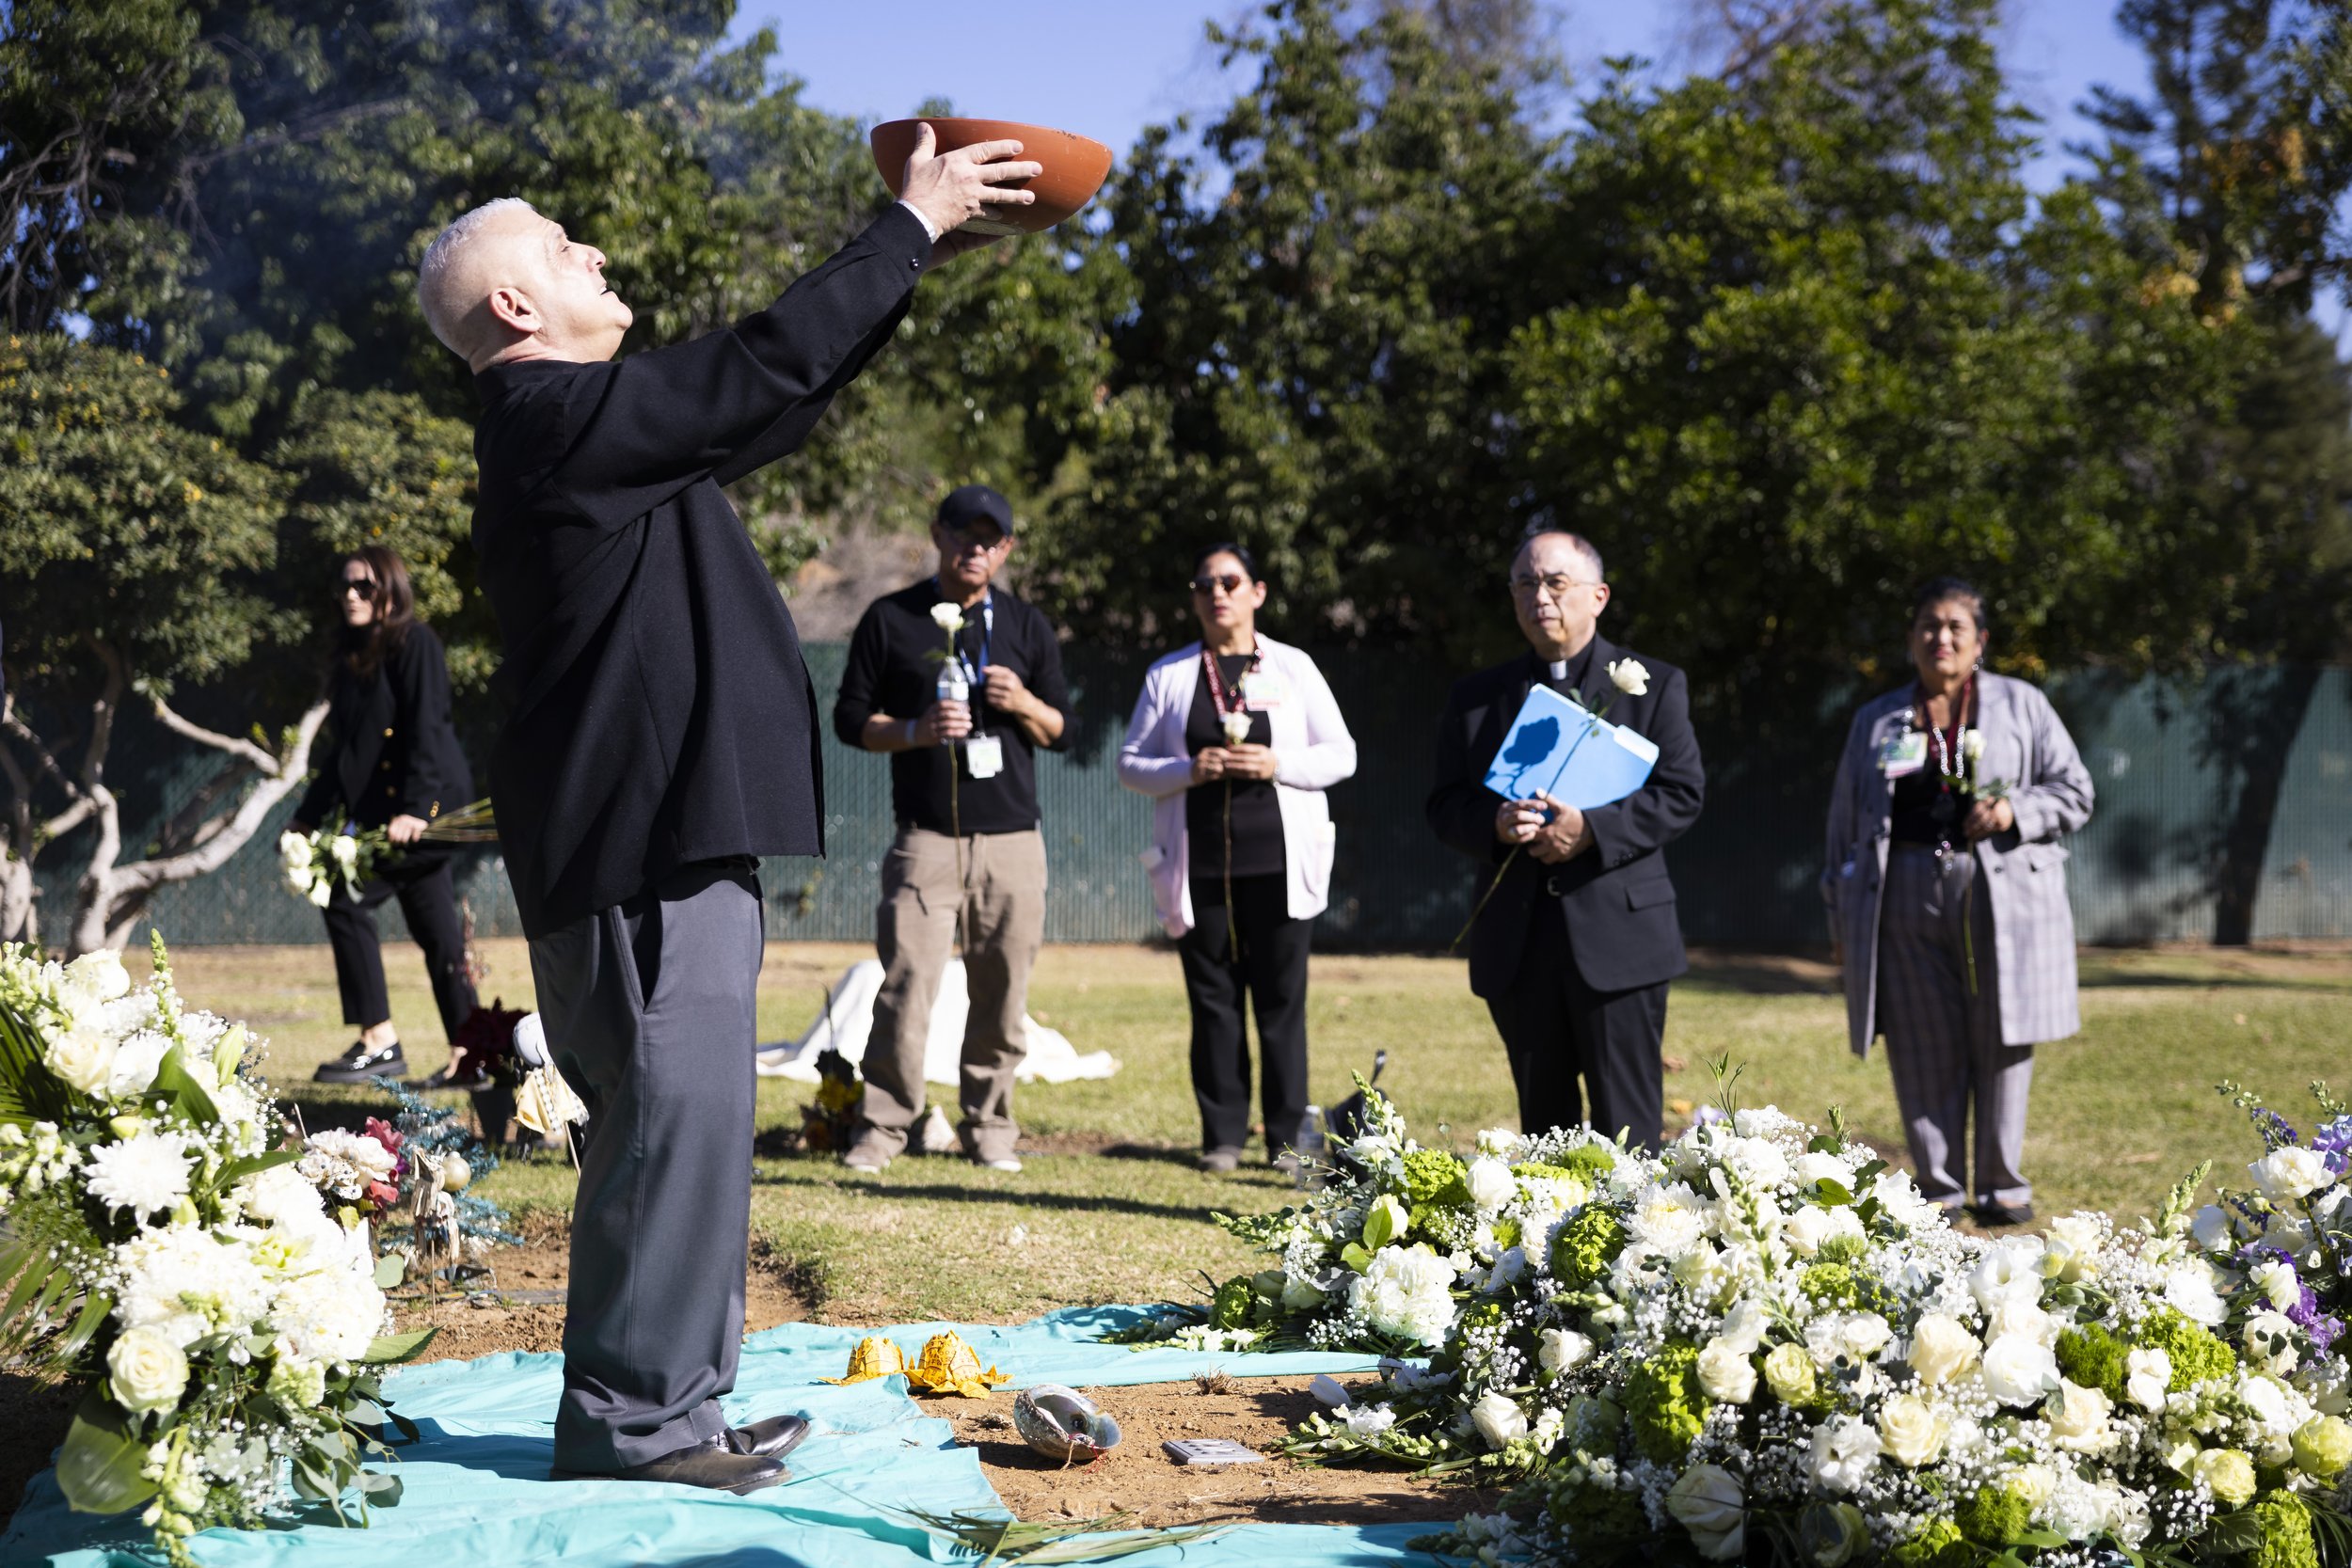  One of the religious leaders at the Los Angeles County Ceremony of the Unclaimed Dead holds a bowl of incense over his head at the LA County Cemetery, in Los Angeles, Calif., on Thursday, Dec. 14, 2023. The interfaith ceremony honored 1,937 individu